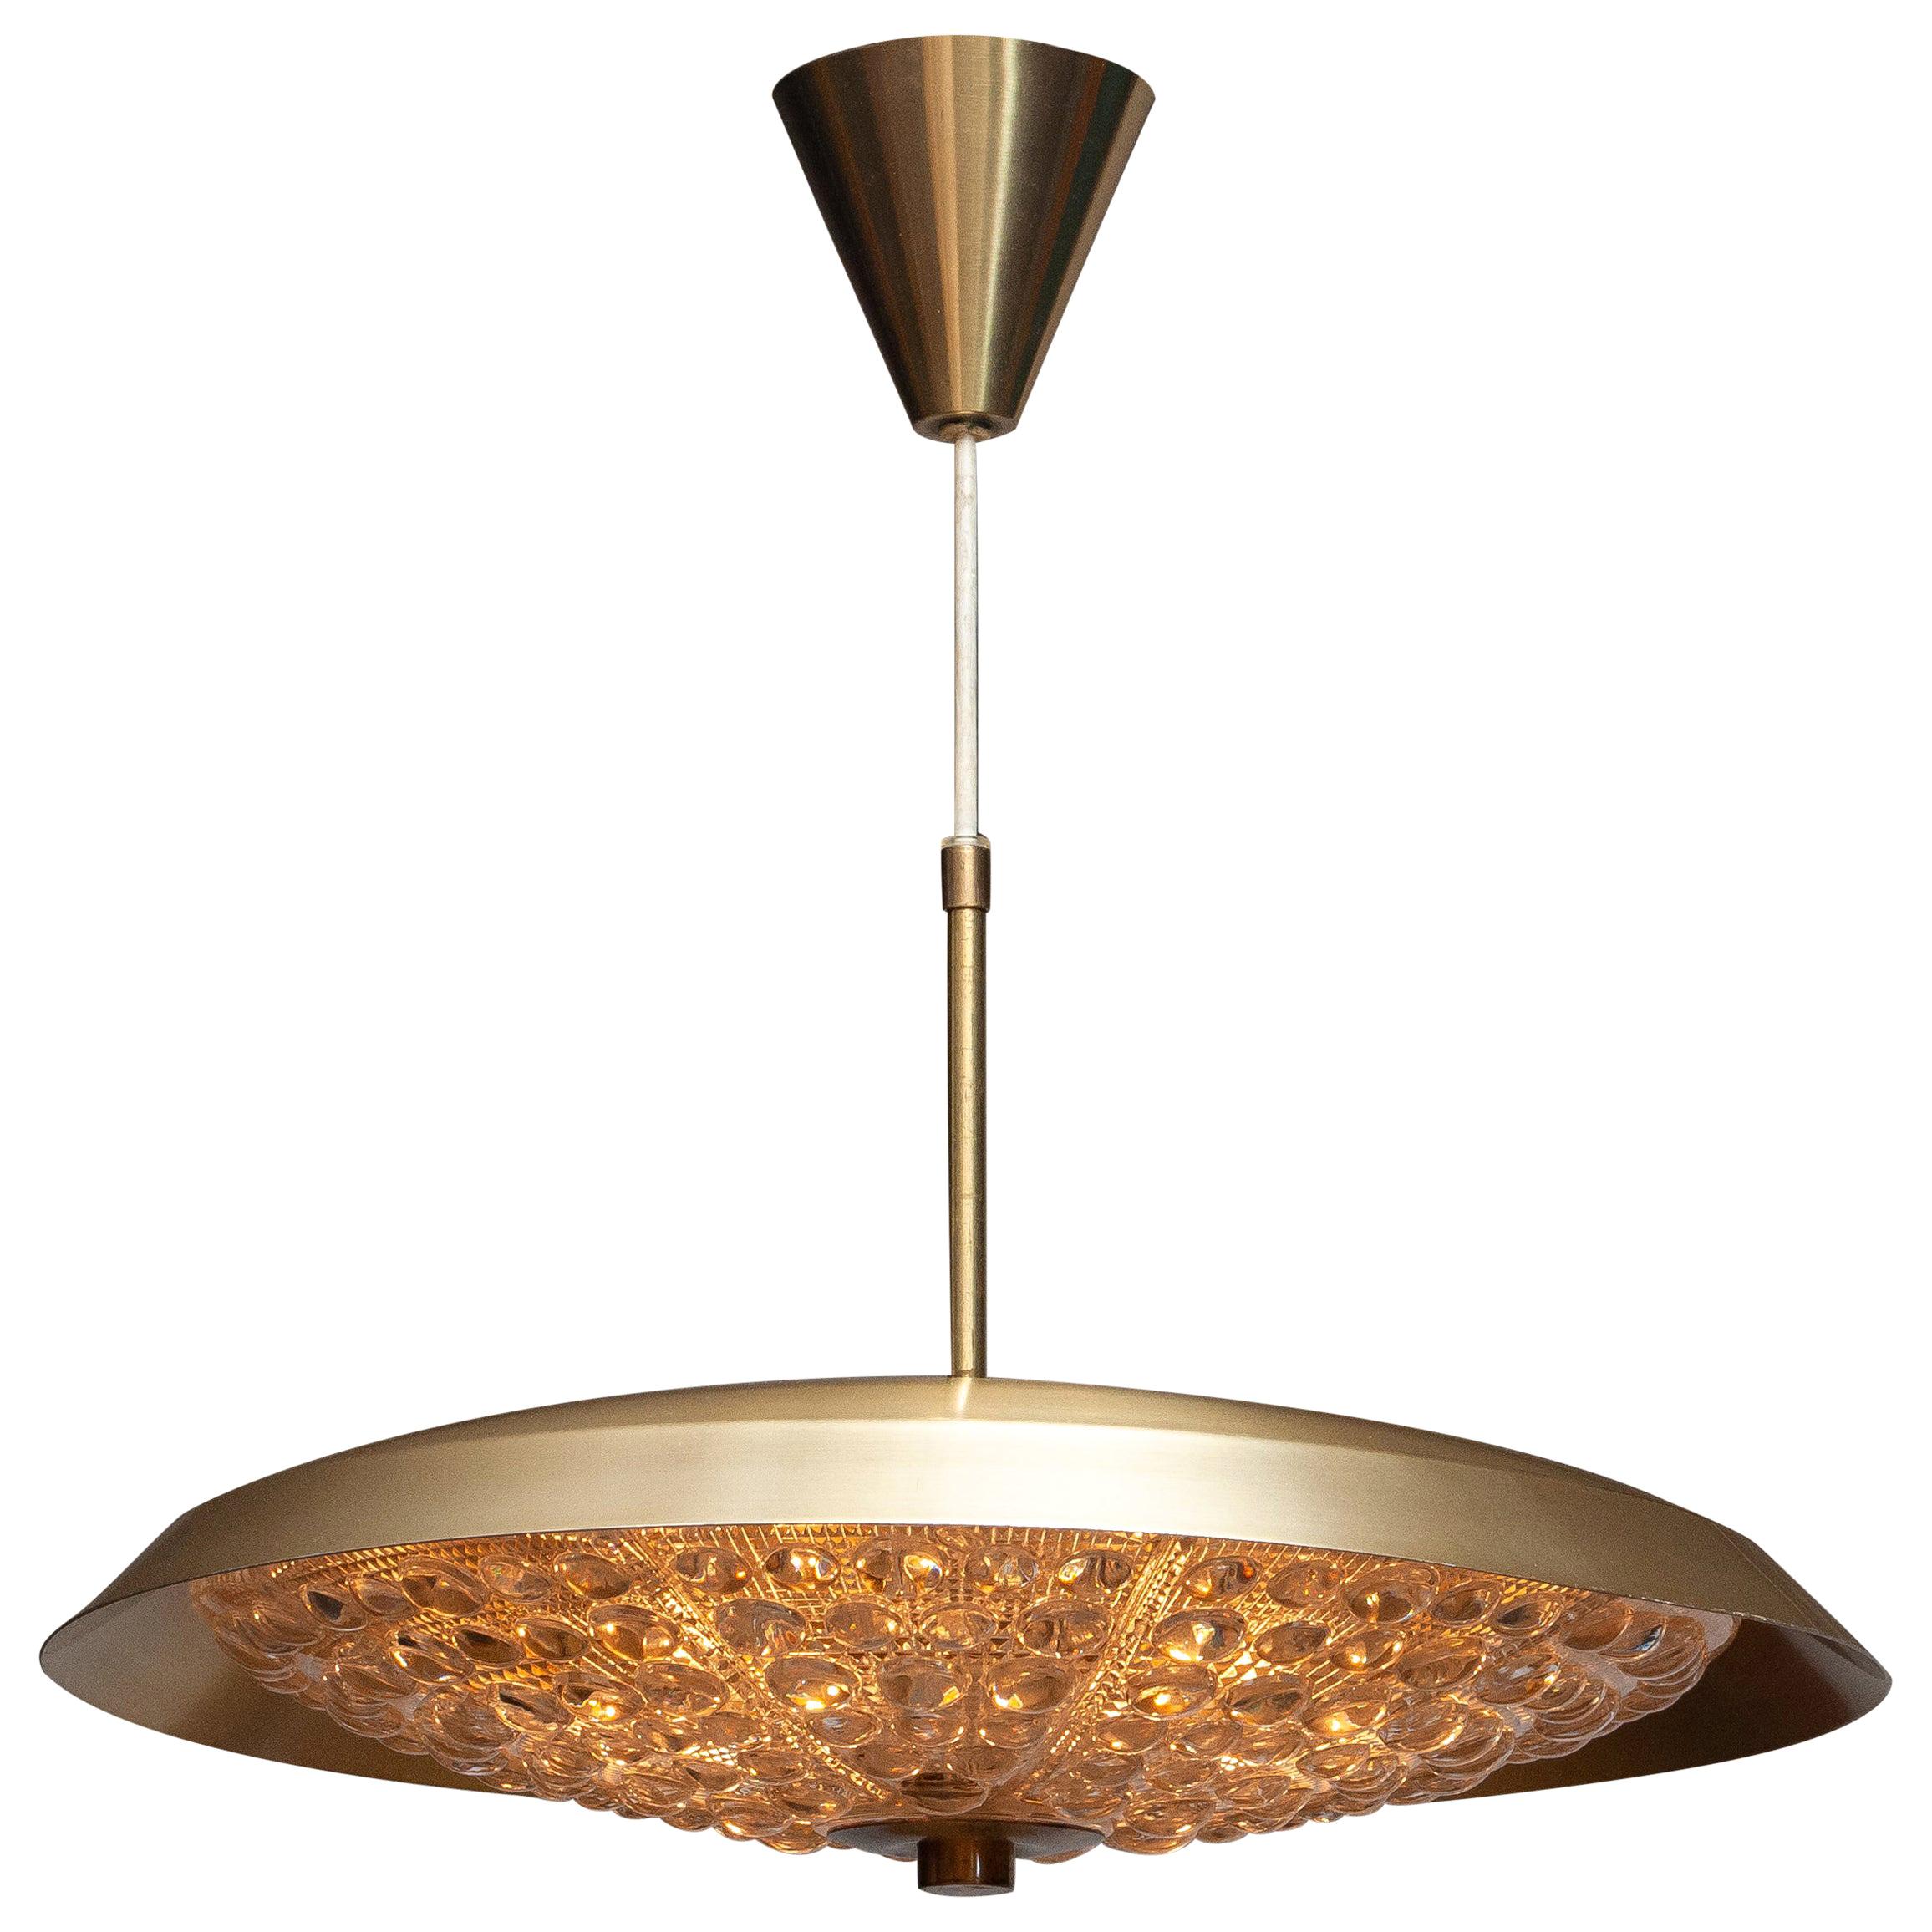 Beautiful ceiling light / flushmount designed by Carl Fagerlund for Orrefors, Sweden, 1950.
Fixture consist six fittings. Type E14 / 17. Technically 100%
The overall condition is good.